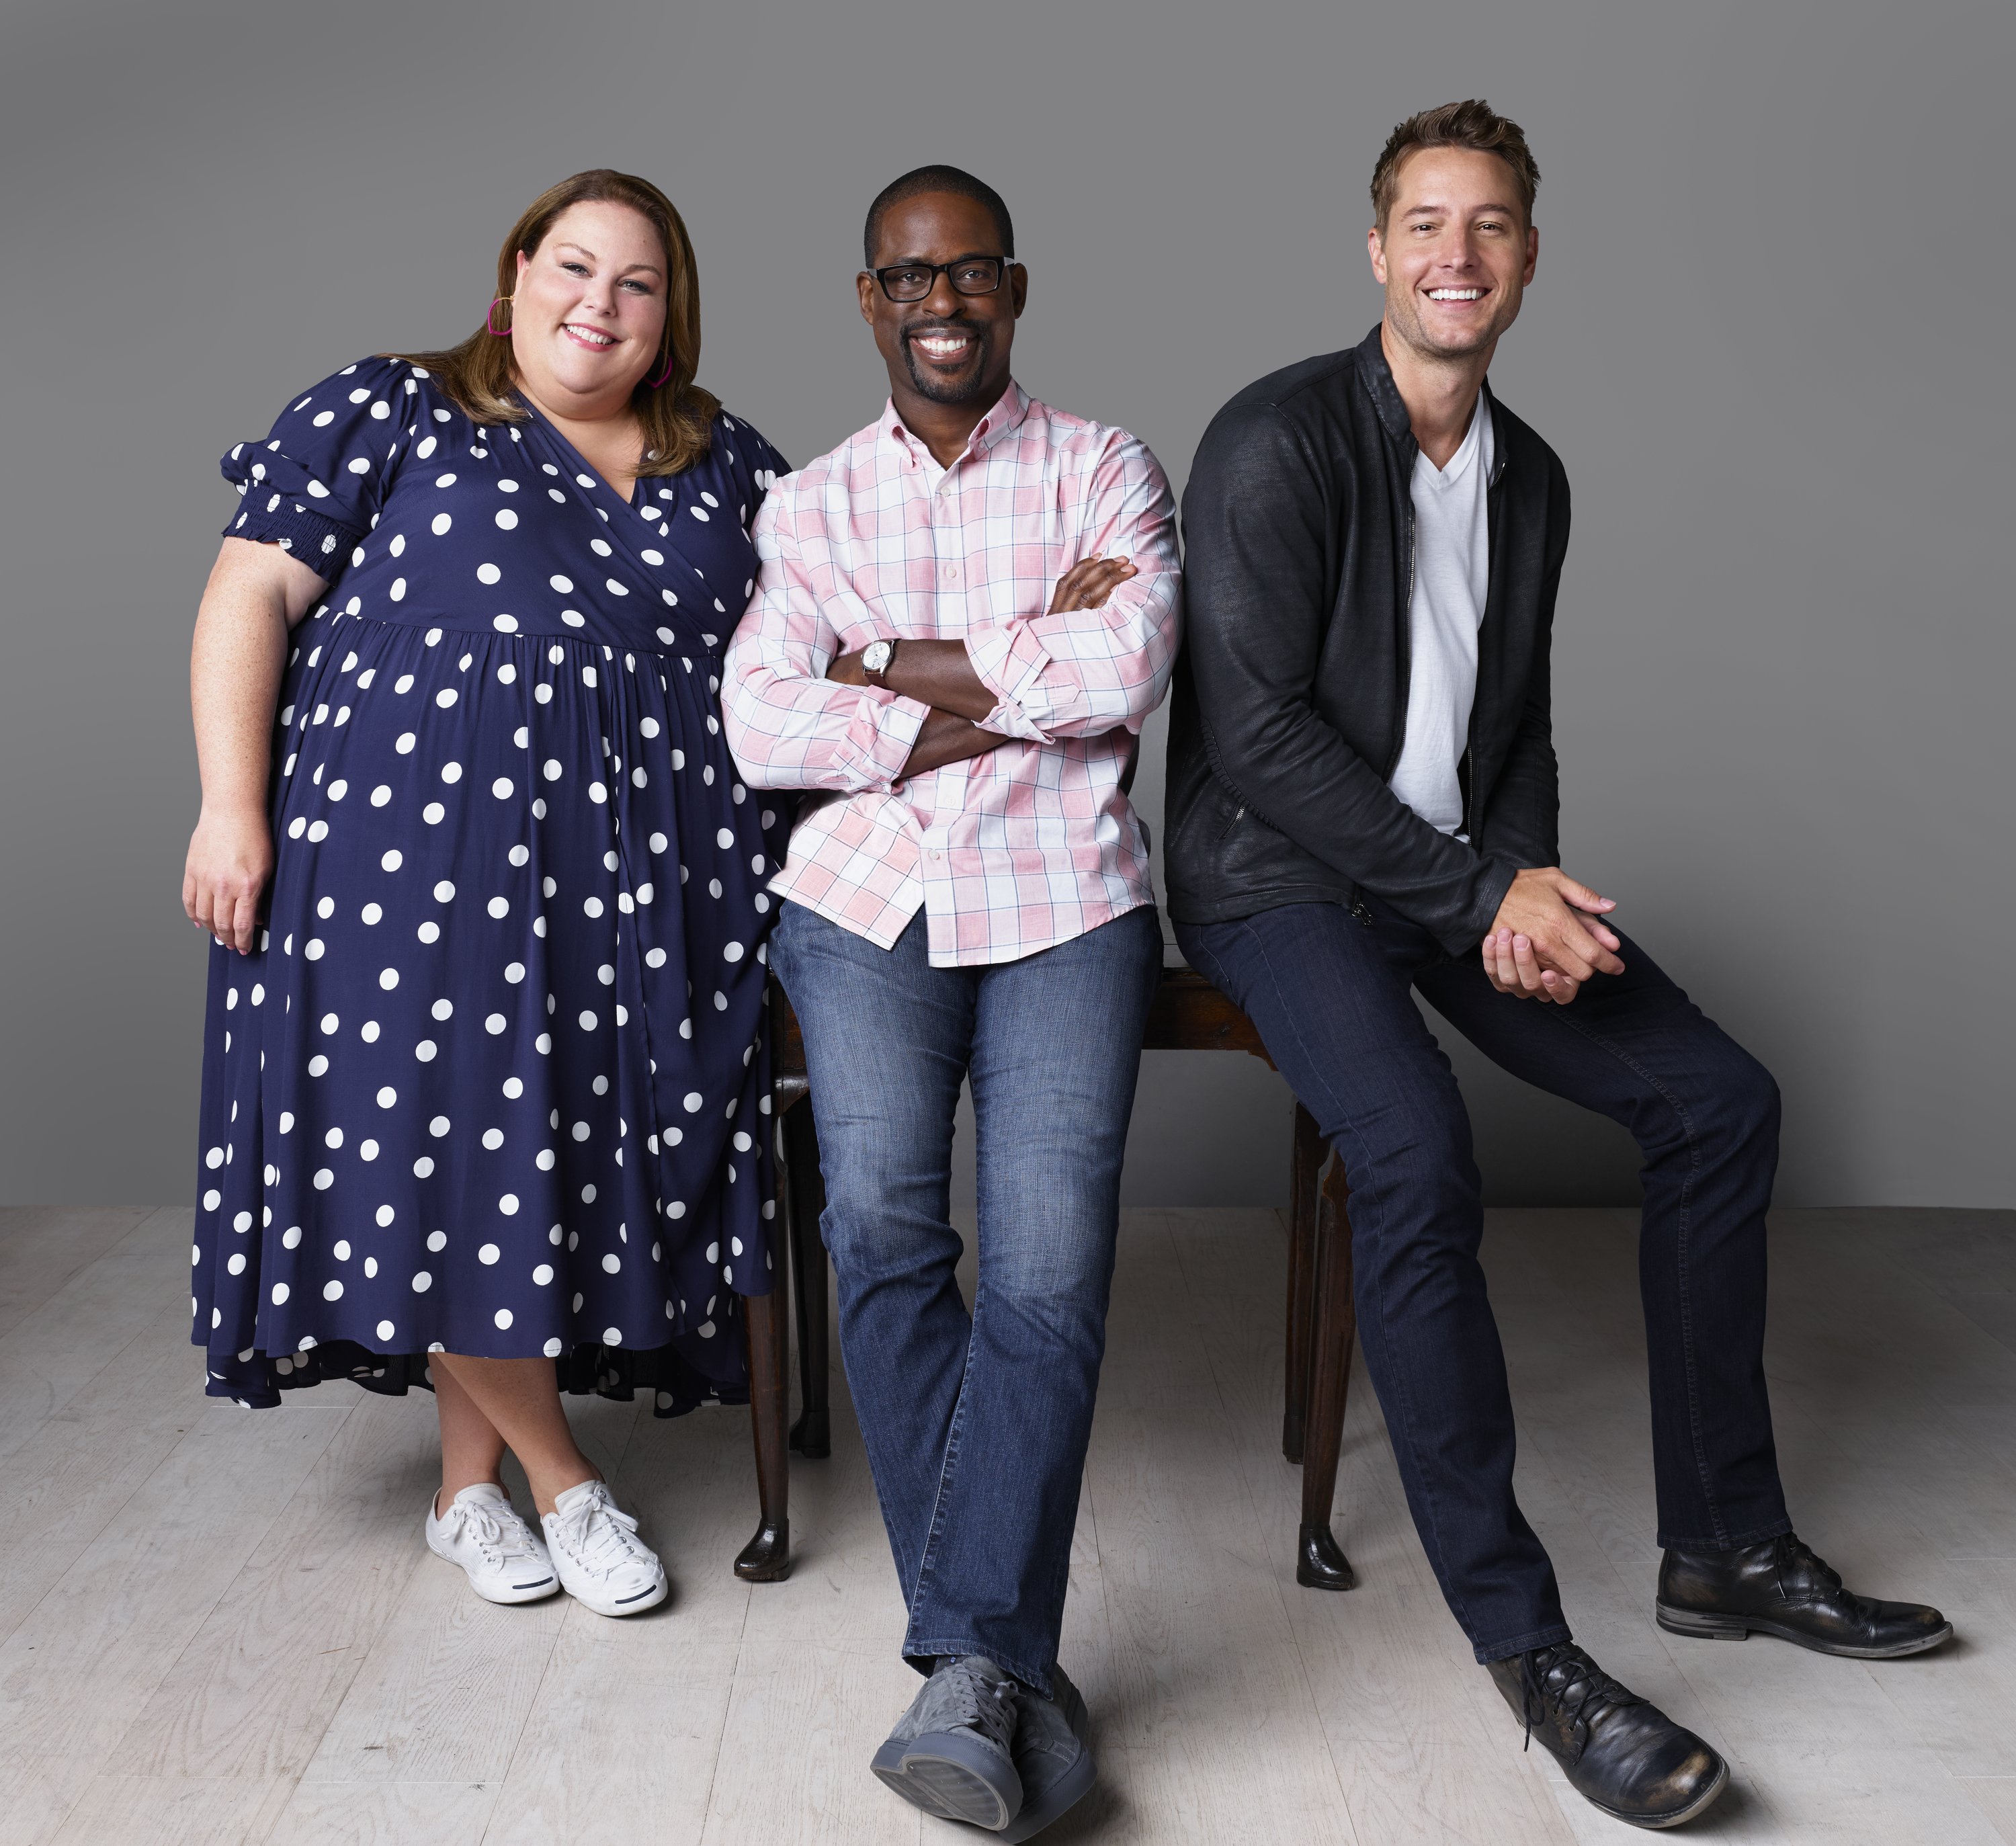 THIS IS US -- Season: 4 -- Pictured: (l-r) Chrissy Metz as Kate Pearson, Sterling K. Brown as Randall Pearson, Justin Hartley as Kevin Pearson | Photo: GettyImages